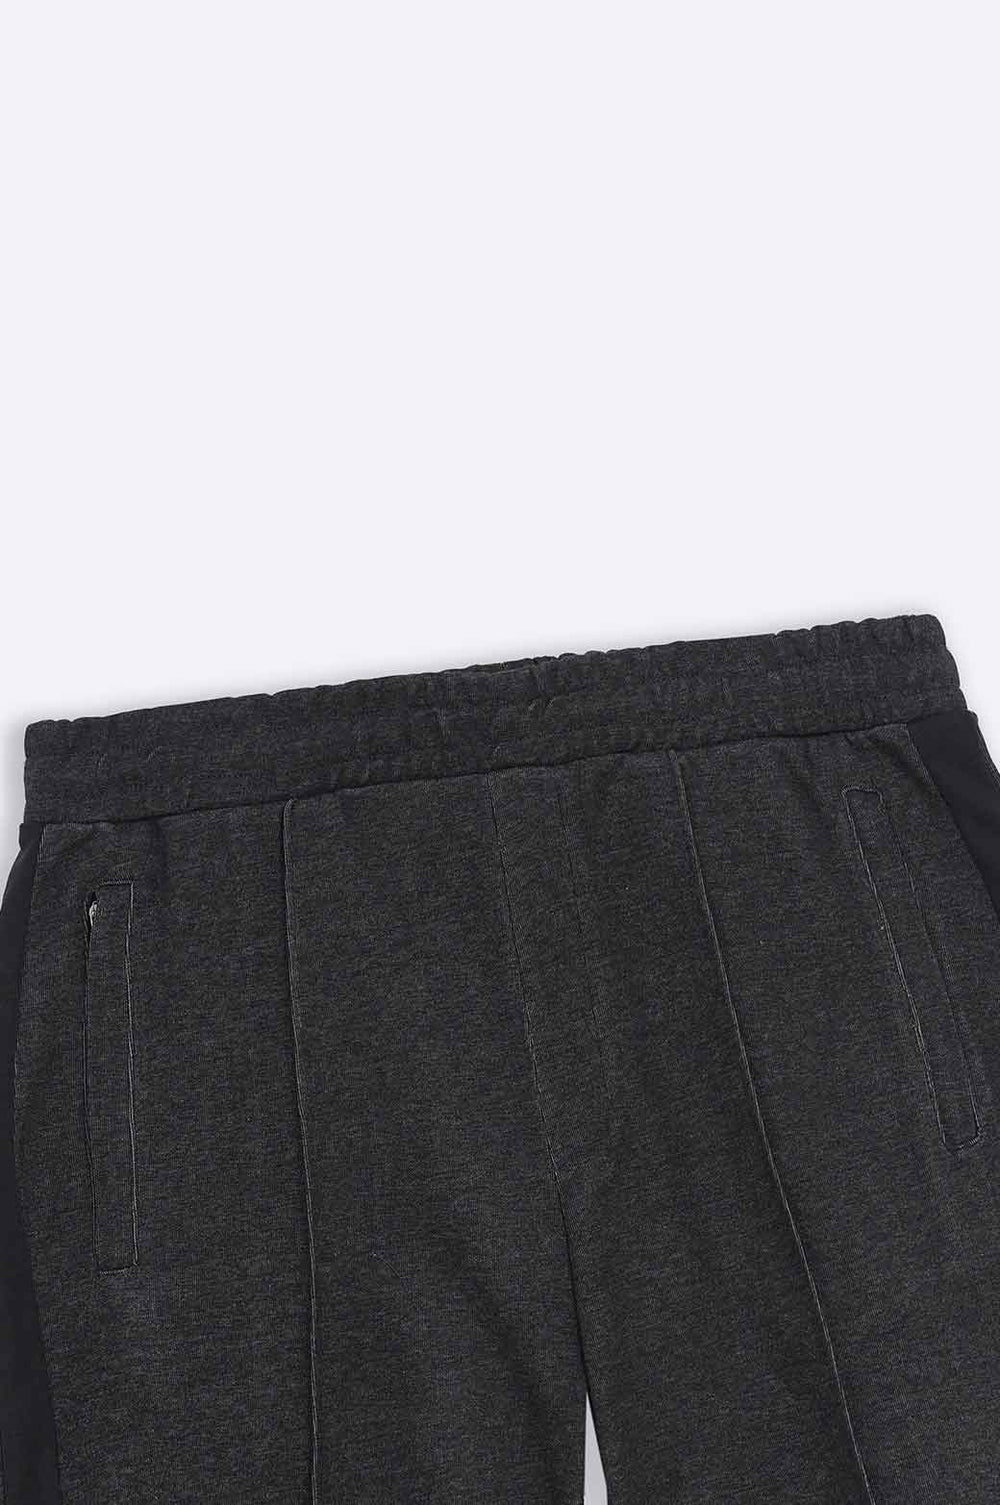 CHARCOAL SHORTS WITH SIDE PANEL